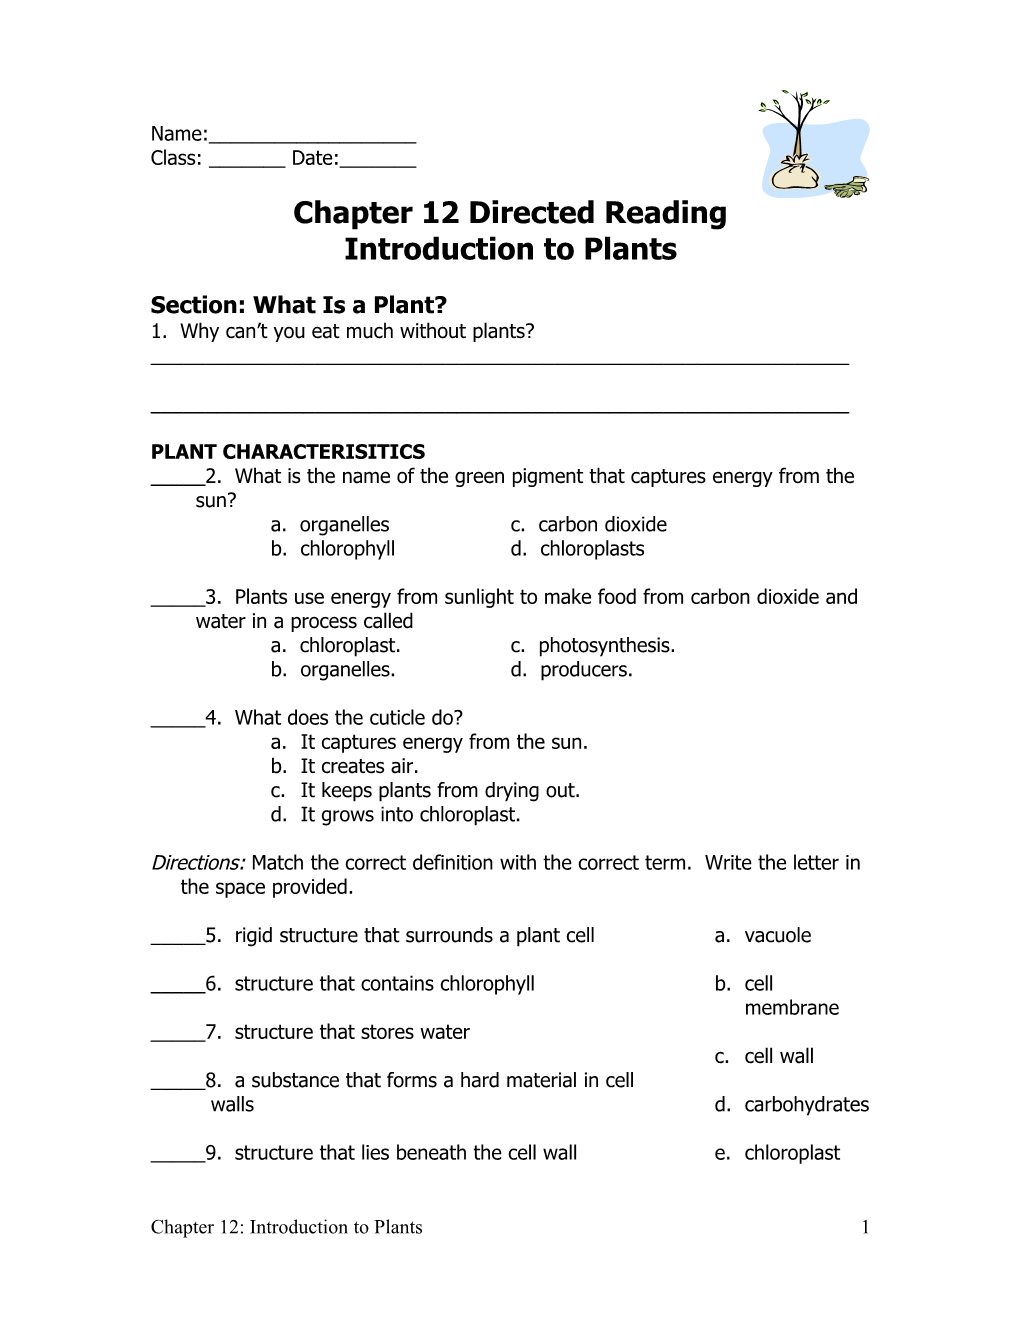 Chapter 12 Directed Reading